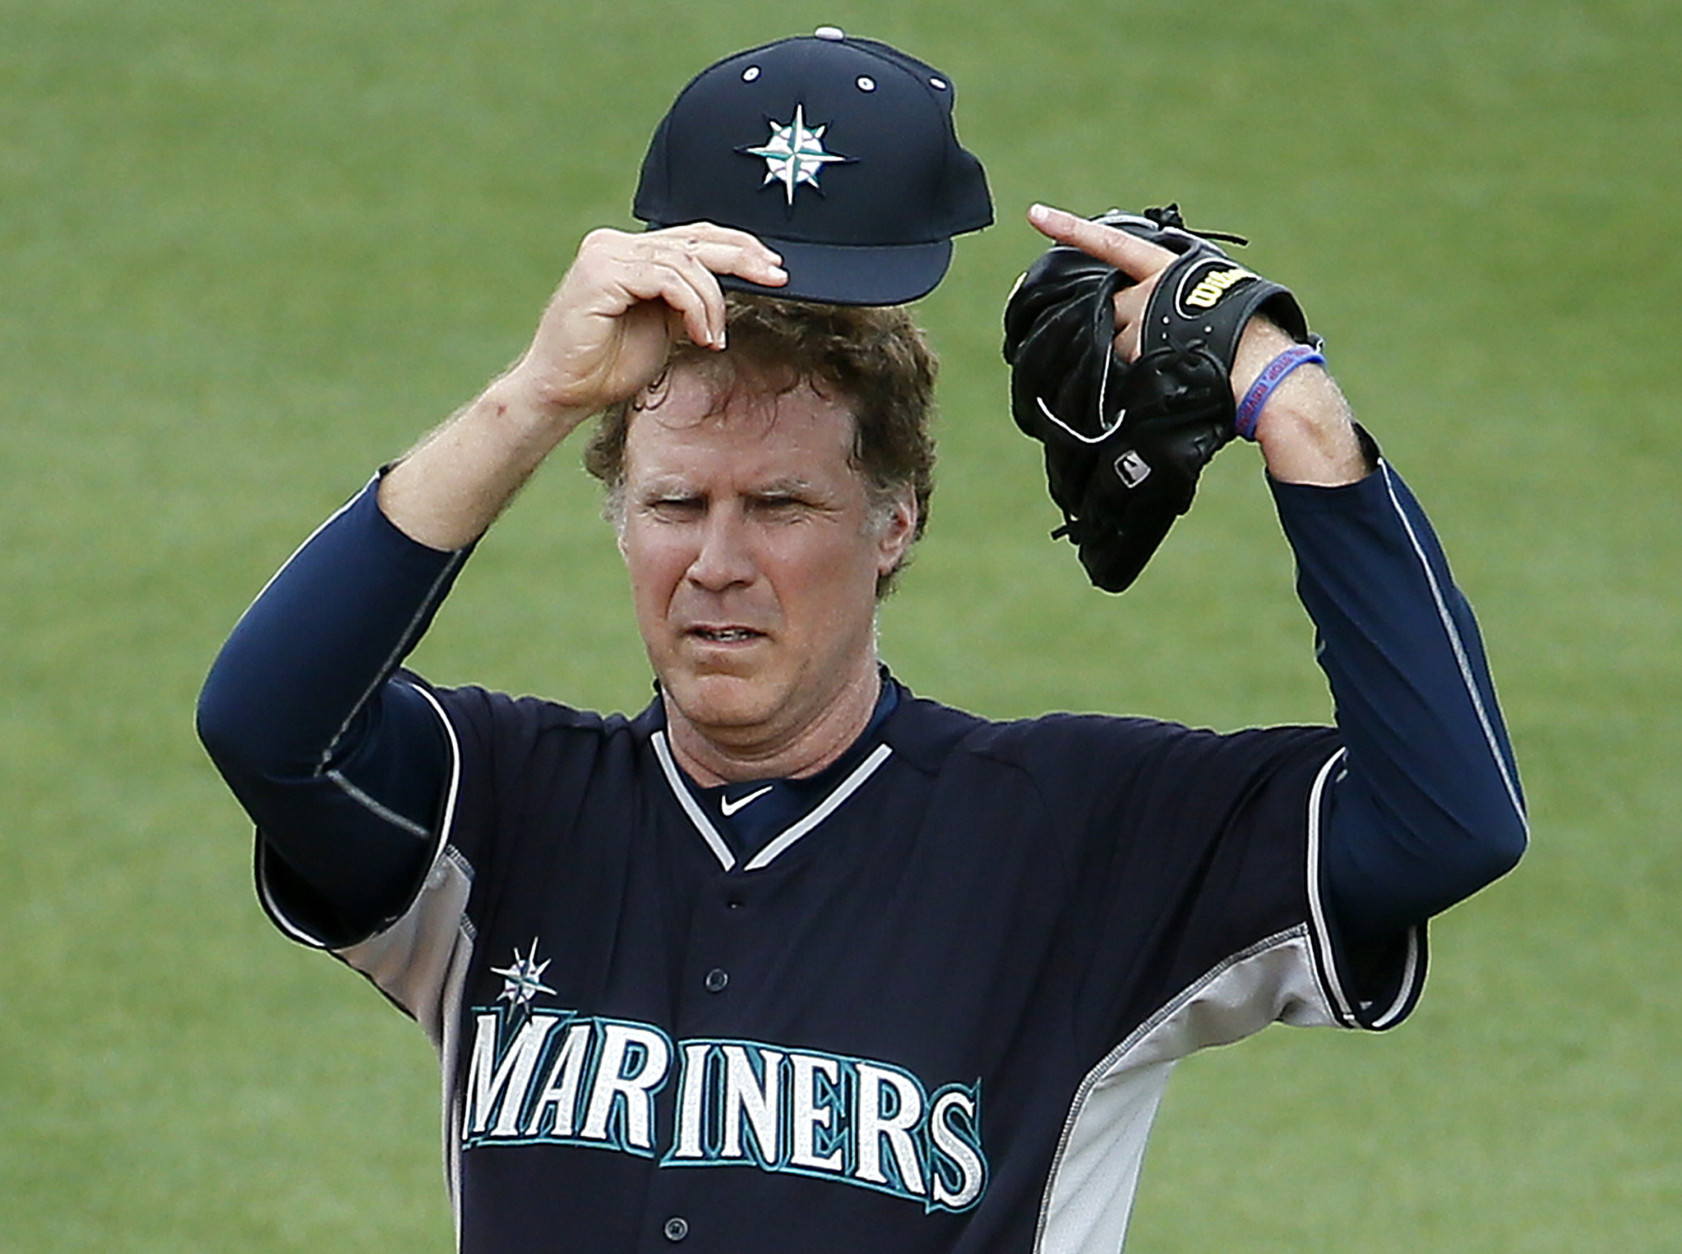 Actor Will Ferrell shows off his cap as he plays second base for the Seattle Mariners during the second inning of a spring training baseball game against the Oakland Athletics, Thursday, March 12, 2015, in Mesa, Ariz. The comedian plans to play every position while making appearances at five Arizona spring training games on Thursday. (AP Photo/Matt York)